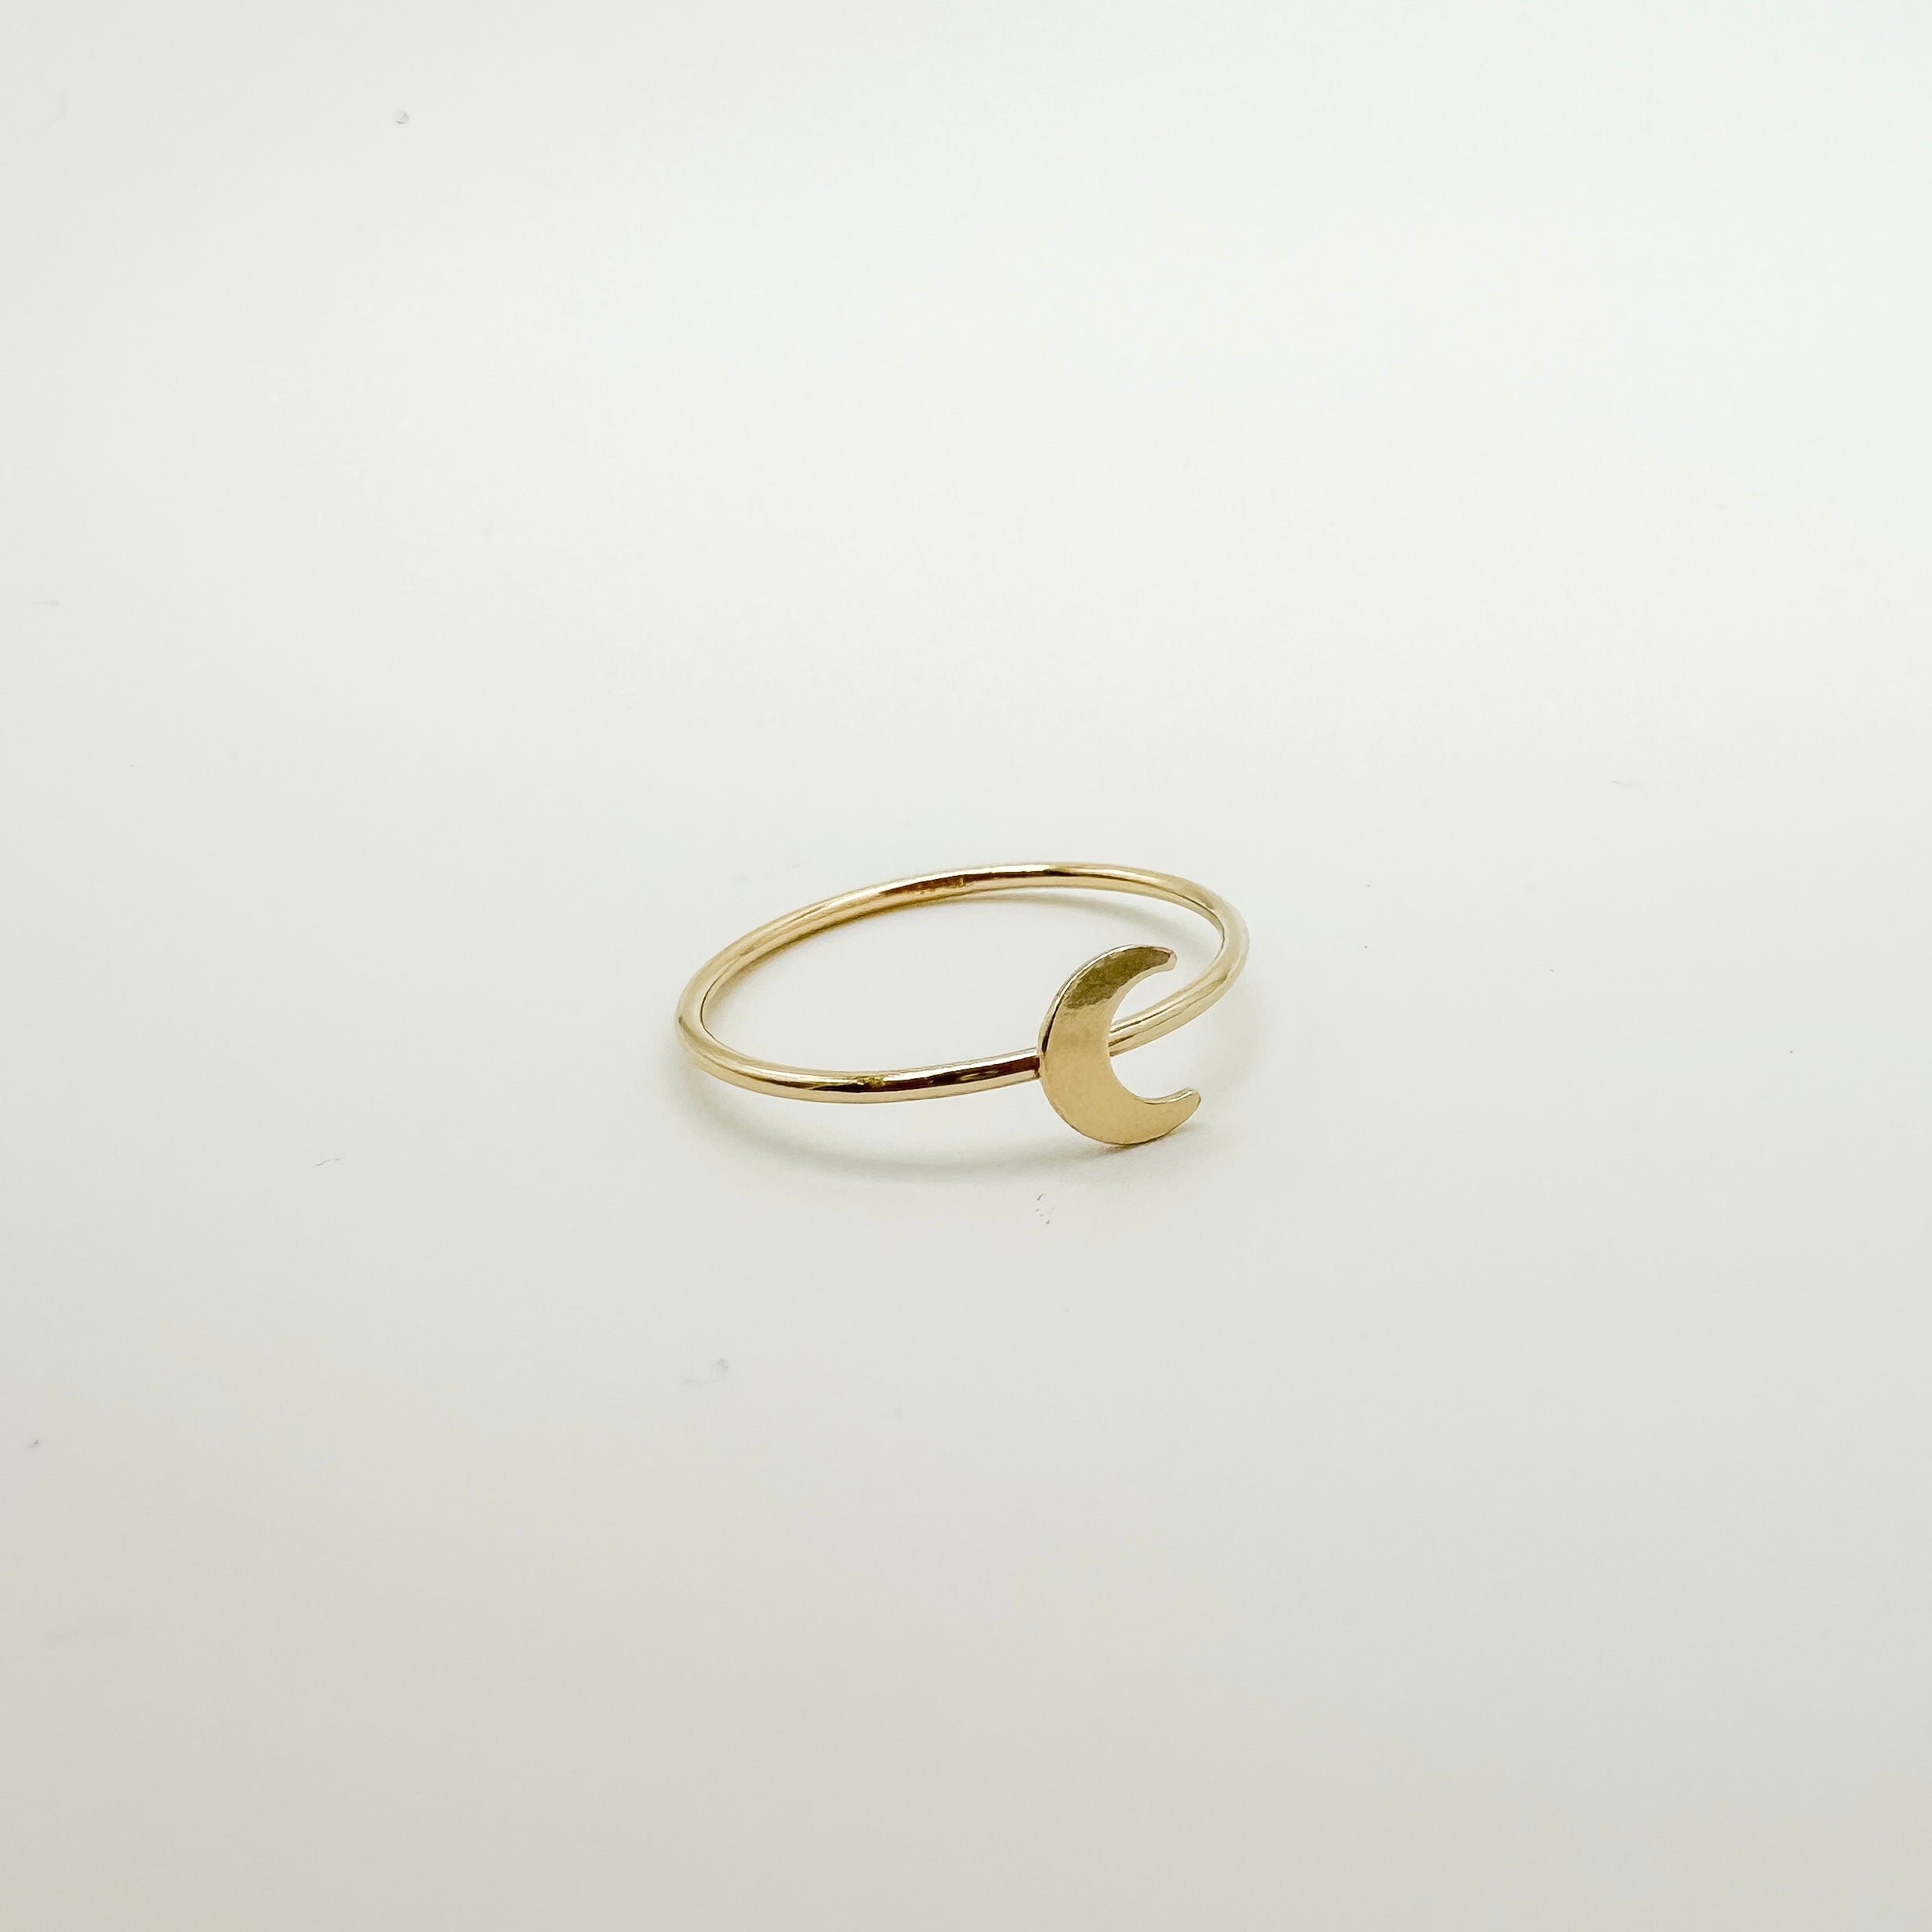 gold filled crescent moon ring, crescent moon ring, moon ring, moon jewelry, gold filled moon ring, gold filled stacking rings, wholesale gold filled rings